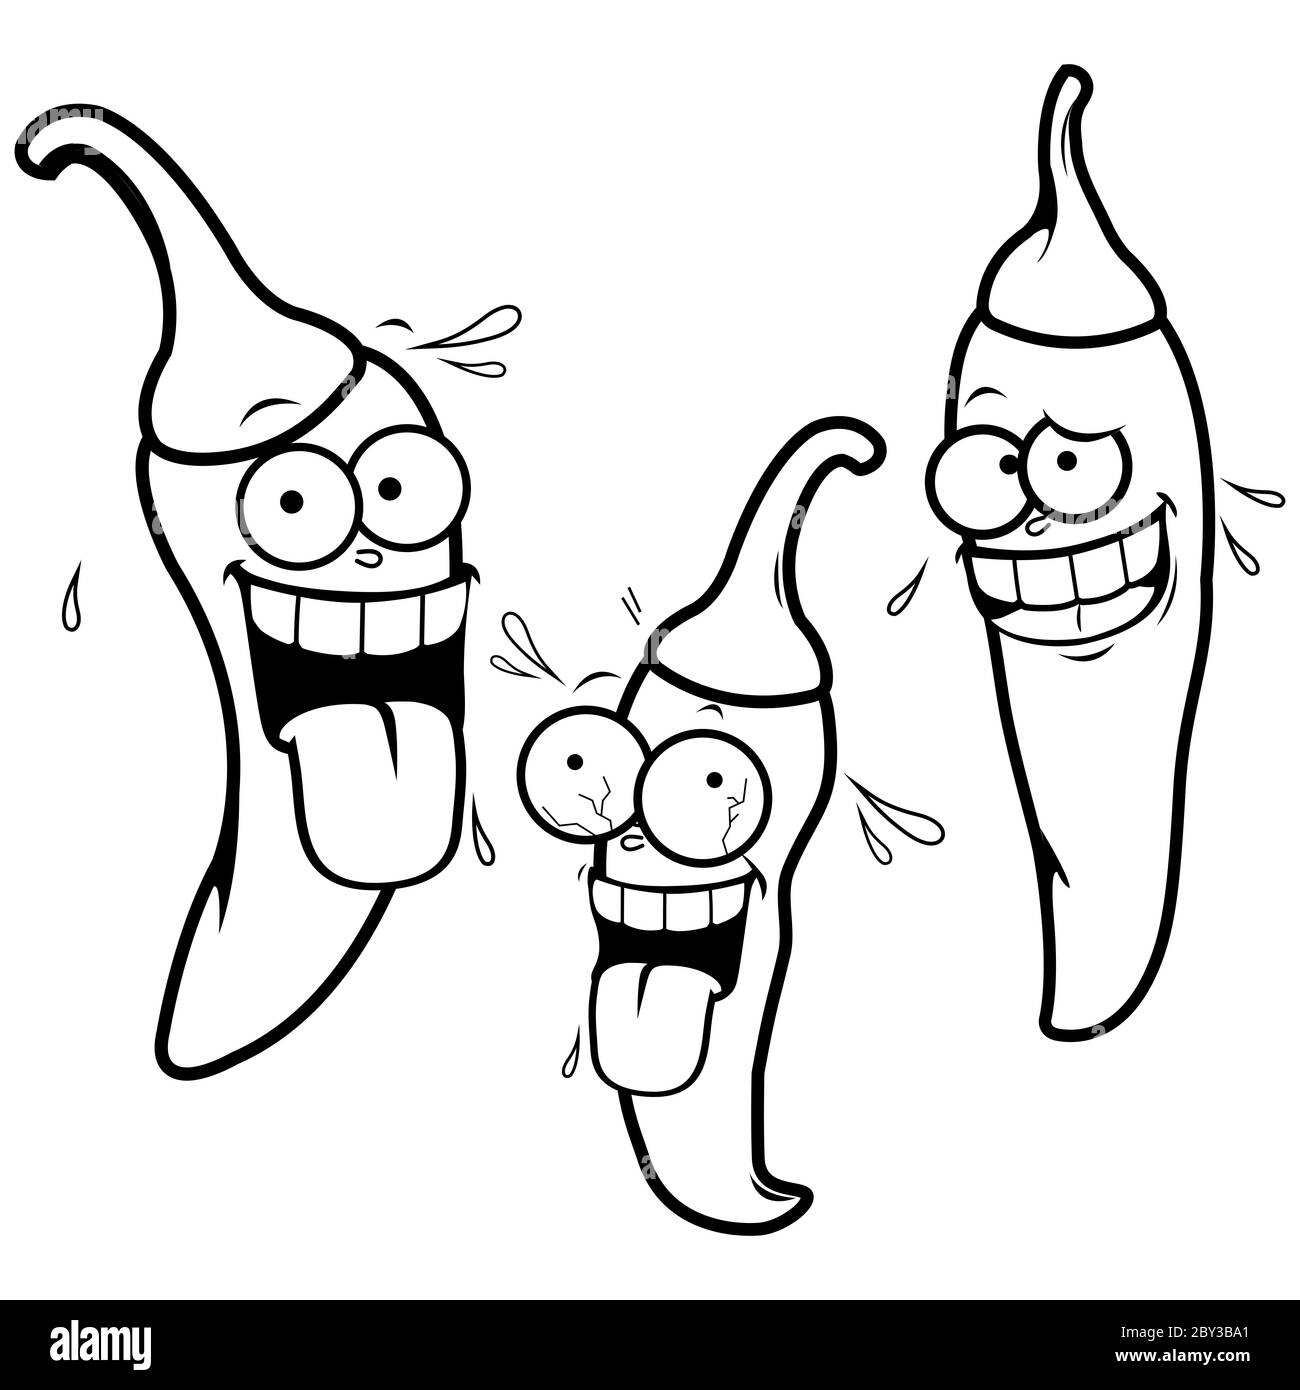 Cartoon hot chili peppers. Black and white coloring page Stock Photo